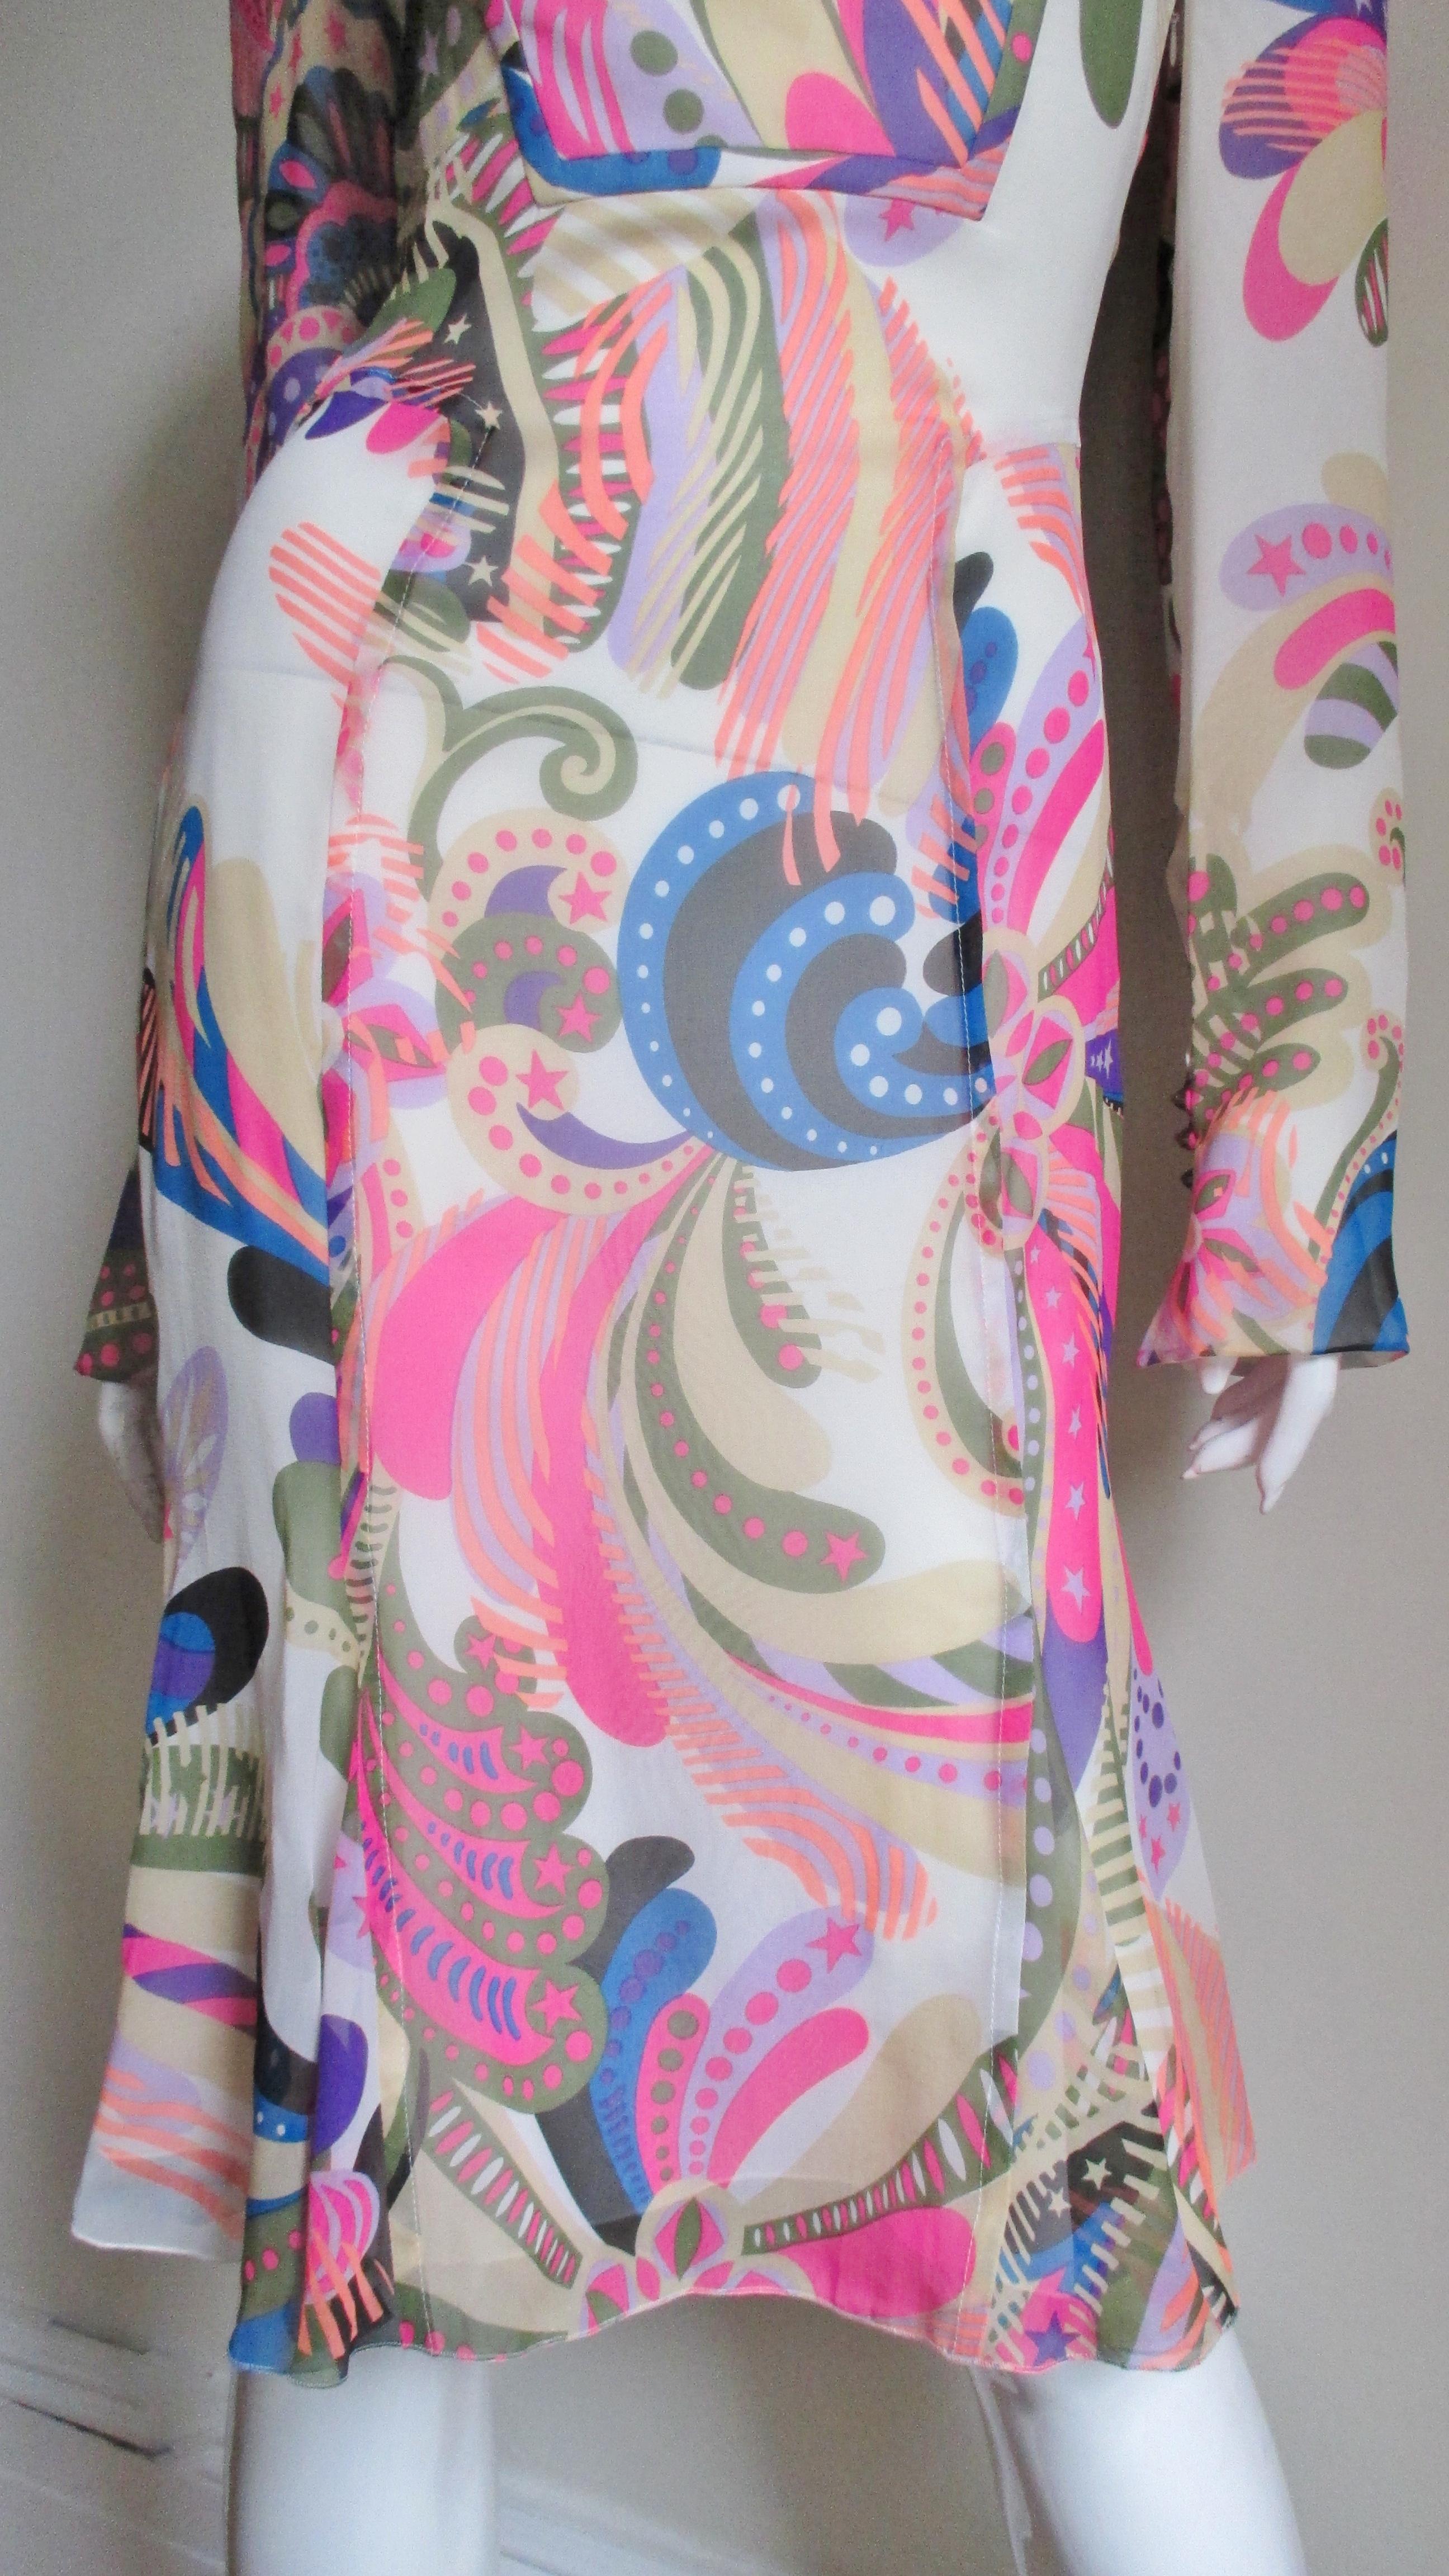  Gianni Versace Couture Print Silk Dress In Excellent Condition For Sale In Water Mill, NY